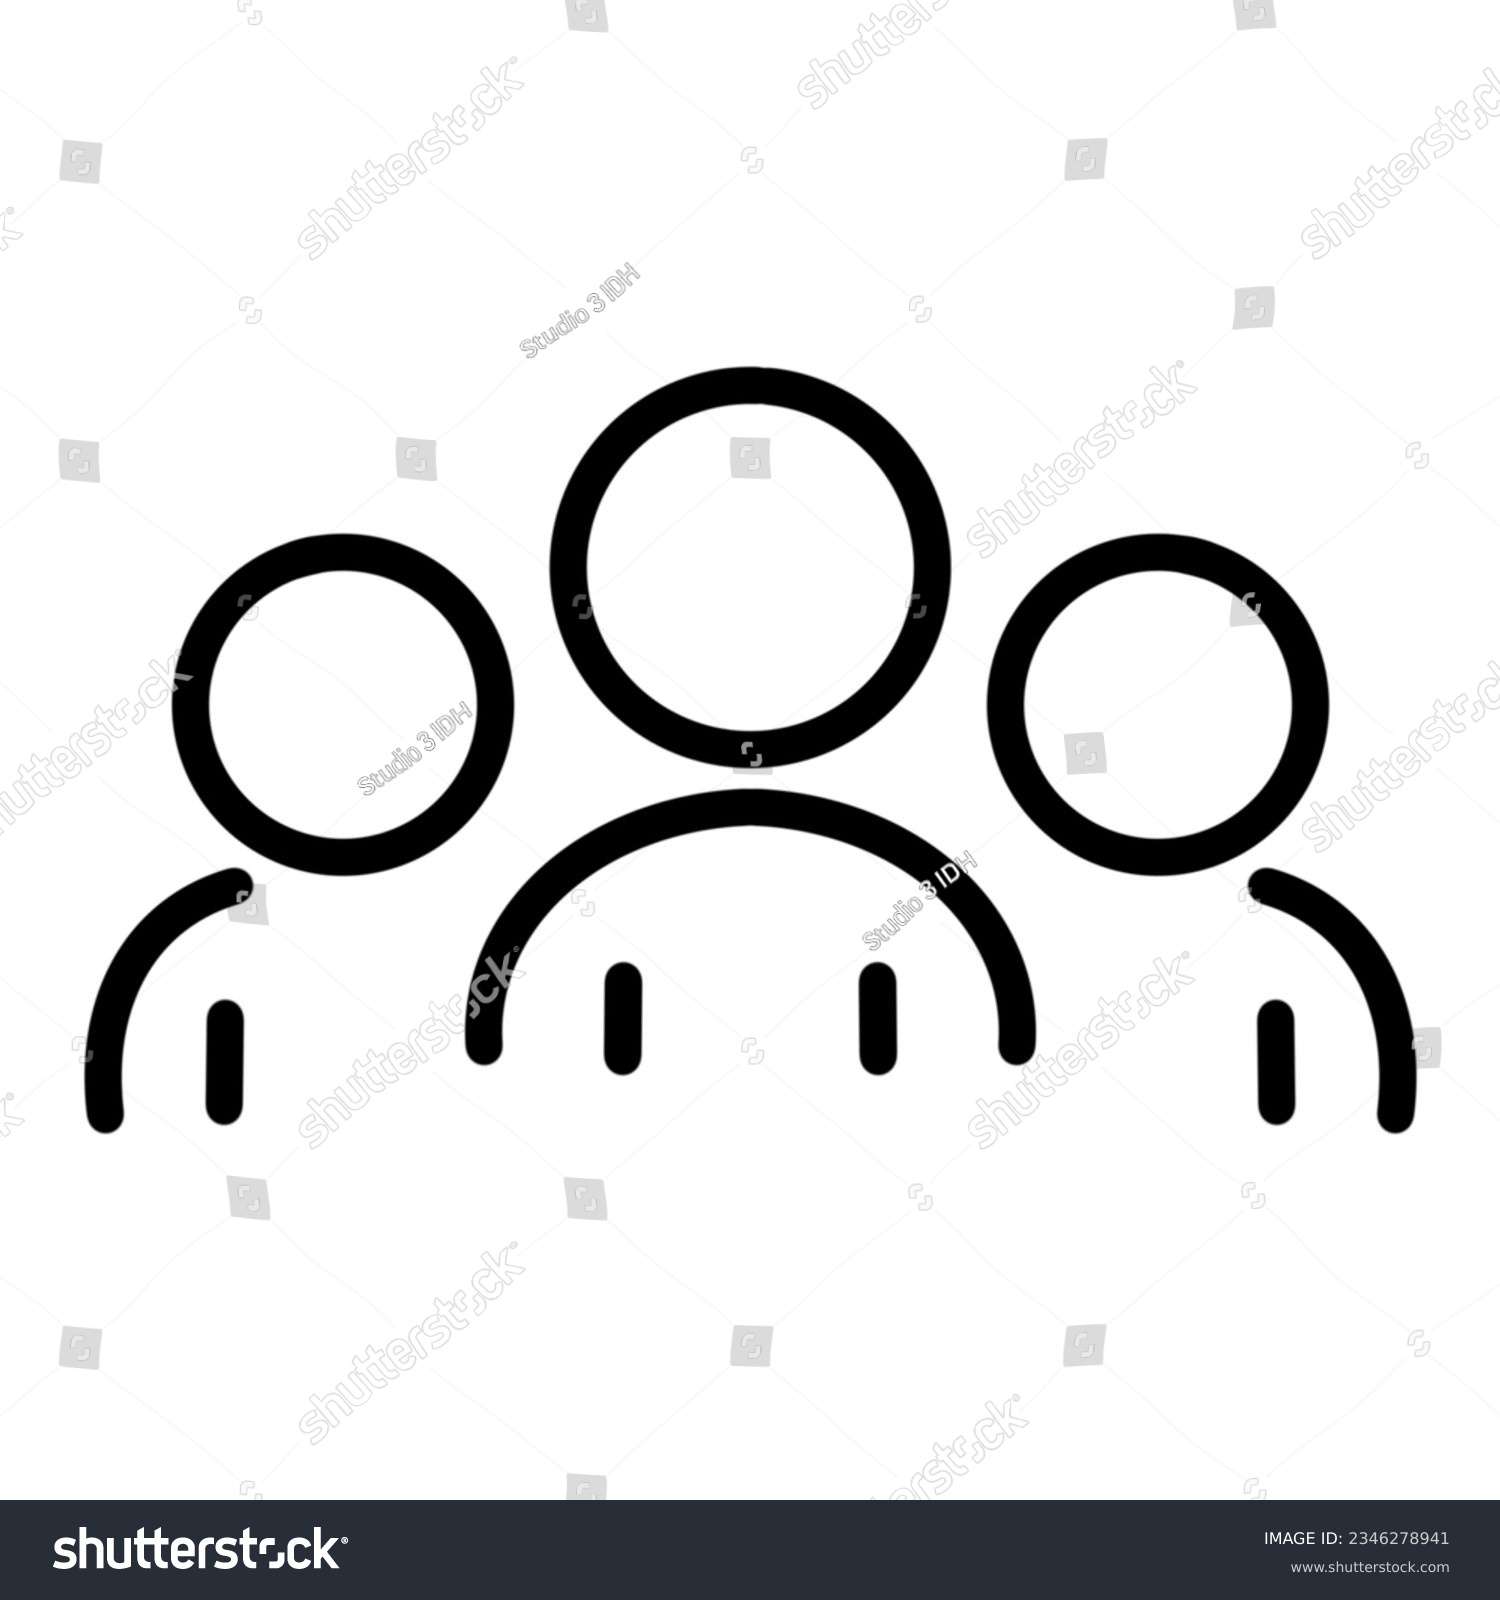 SVG of inclusion social equity icon, help or support employee, gender equality, community care, age and culture diversity, people group save, thin line symbol - editable stroke vector illustration svg